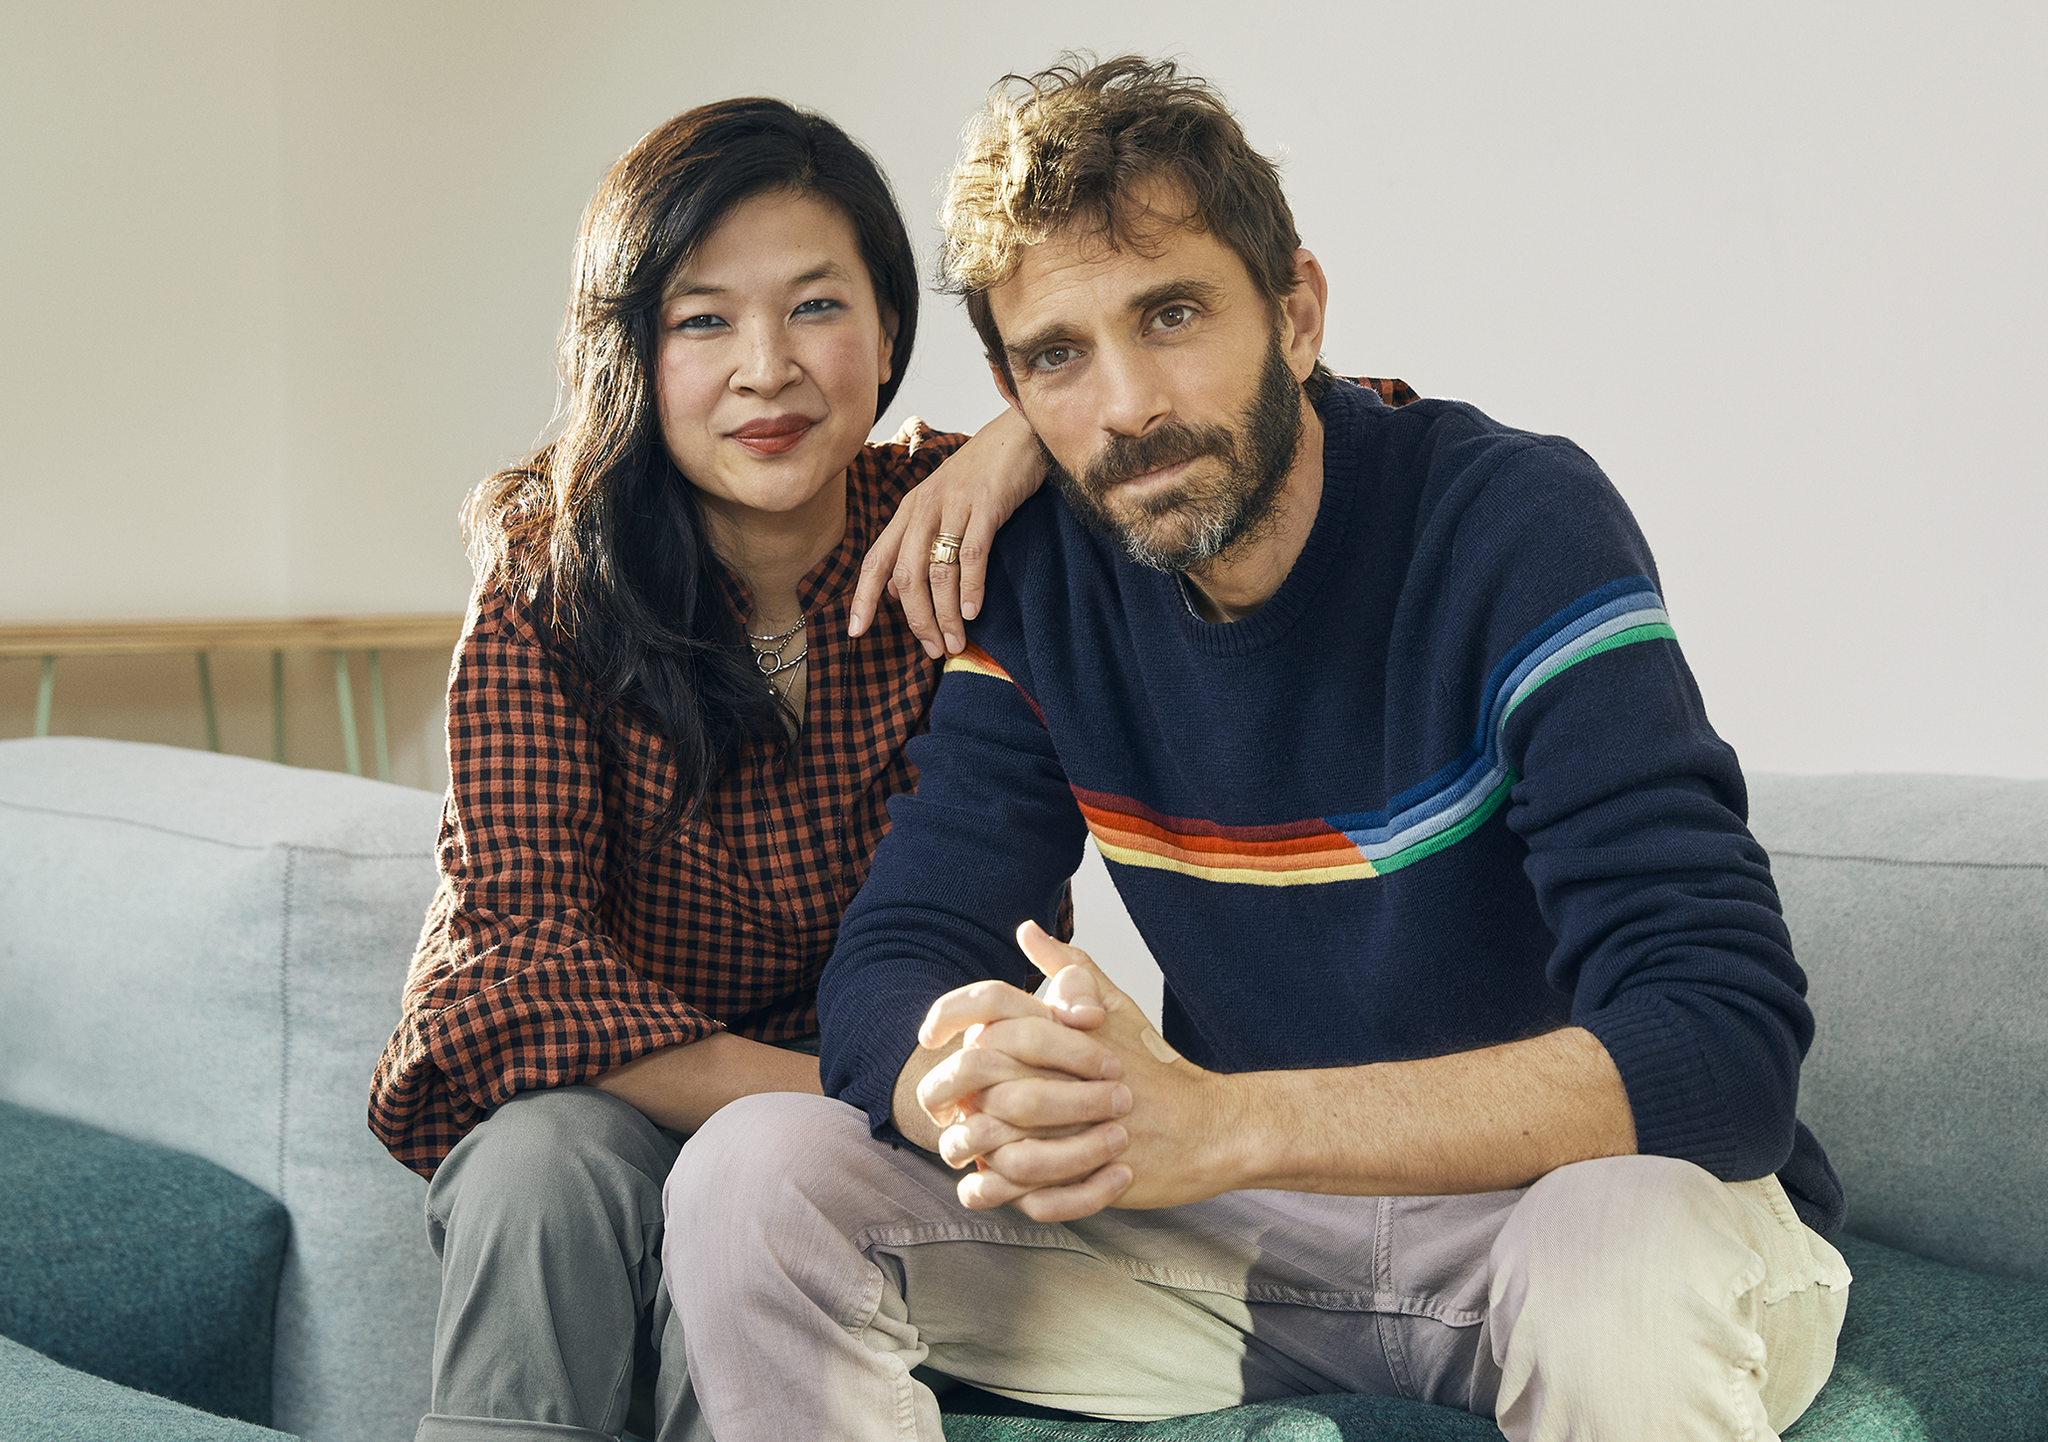 bender, an author, screenwriter, and website founder, with his wife, suchin pak, ﻿a journalist and ﻿cohost of the podcast add to cart